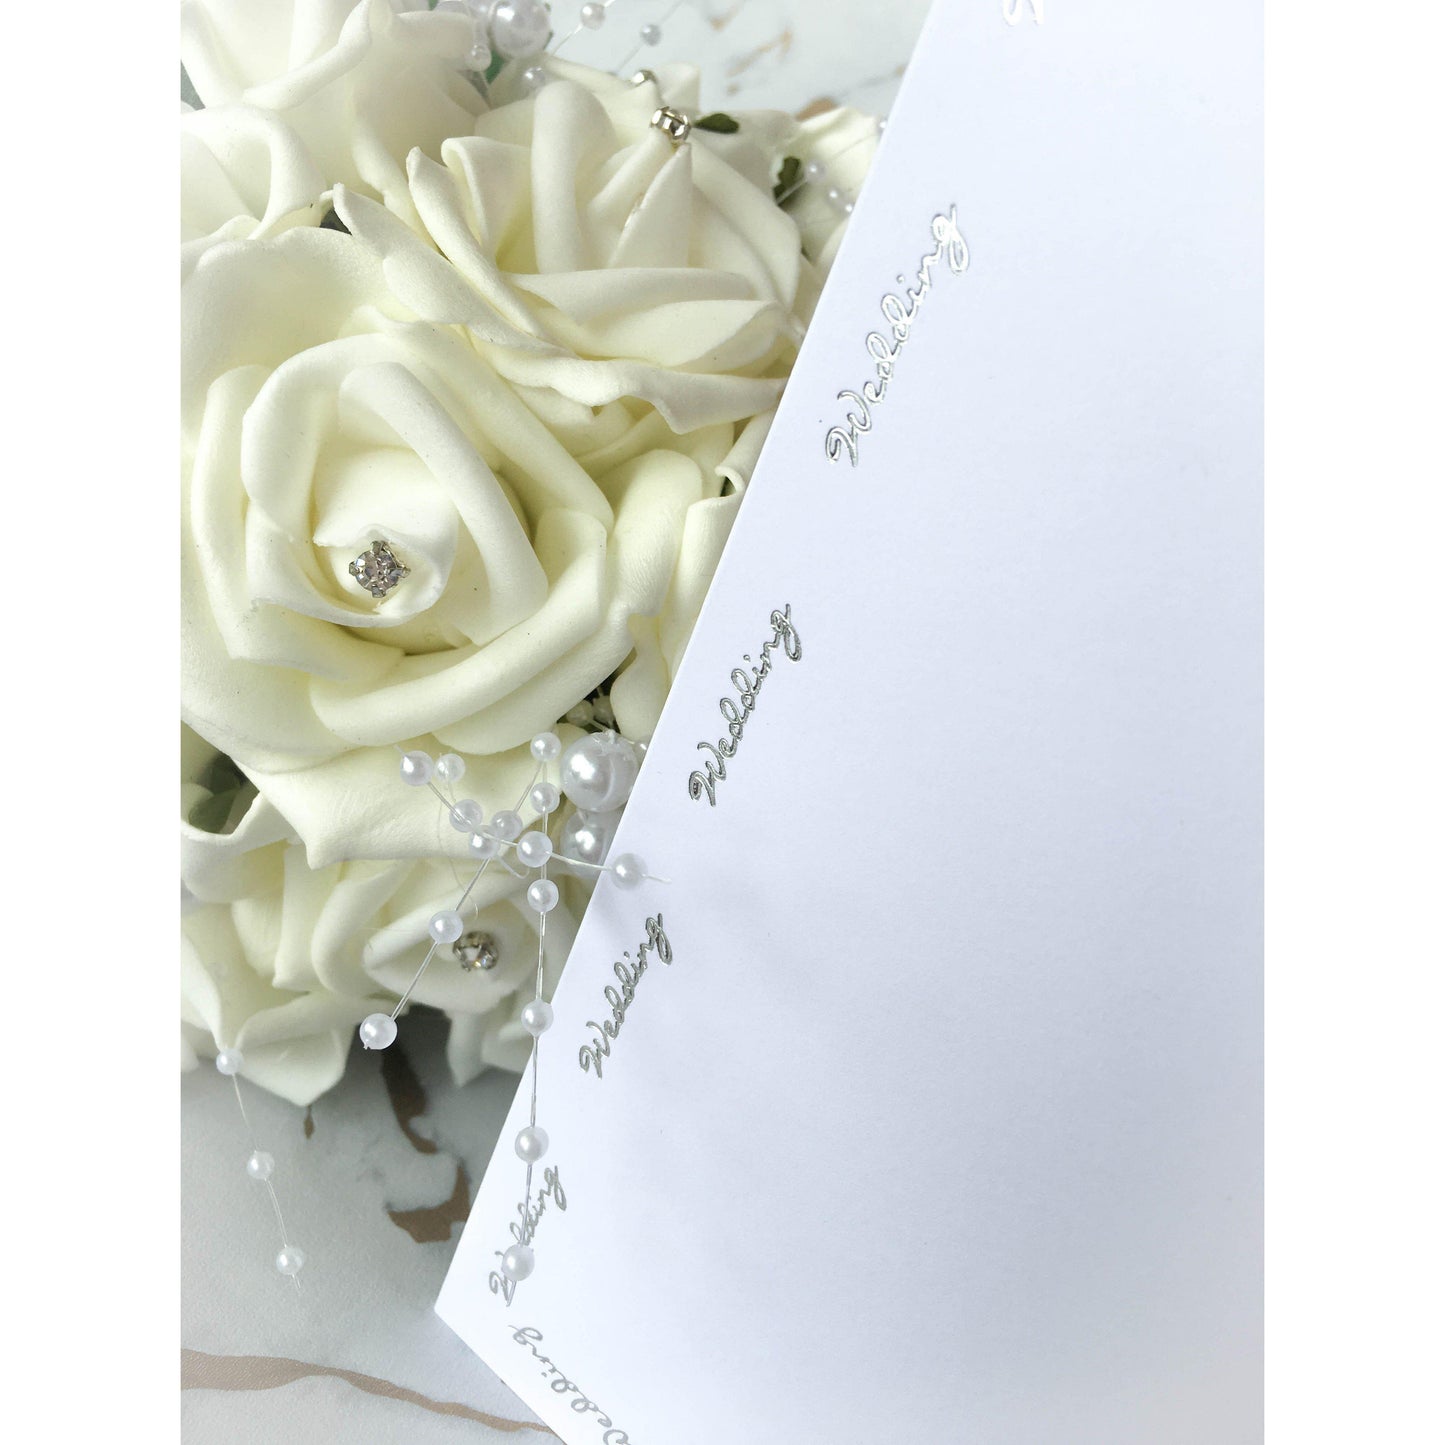 A5 Card Blanks Smooth White With Silver Foil Wedding Script 10pk - Clearance-The Creative Bride